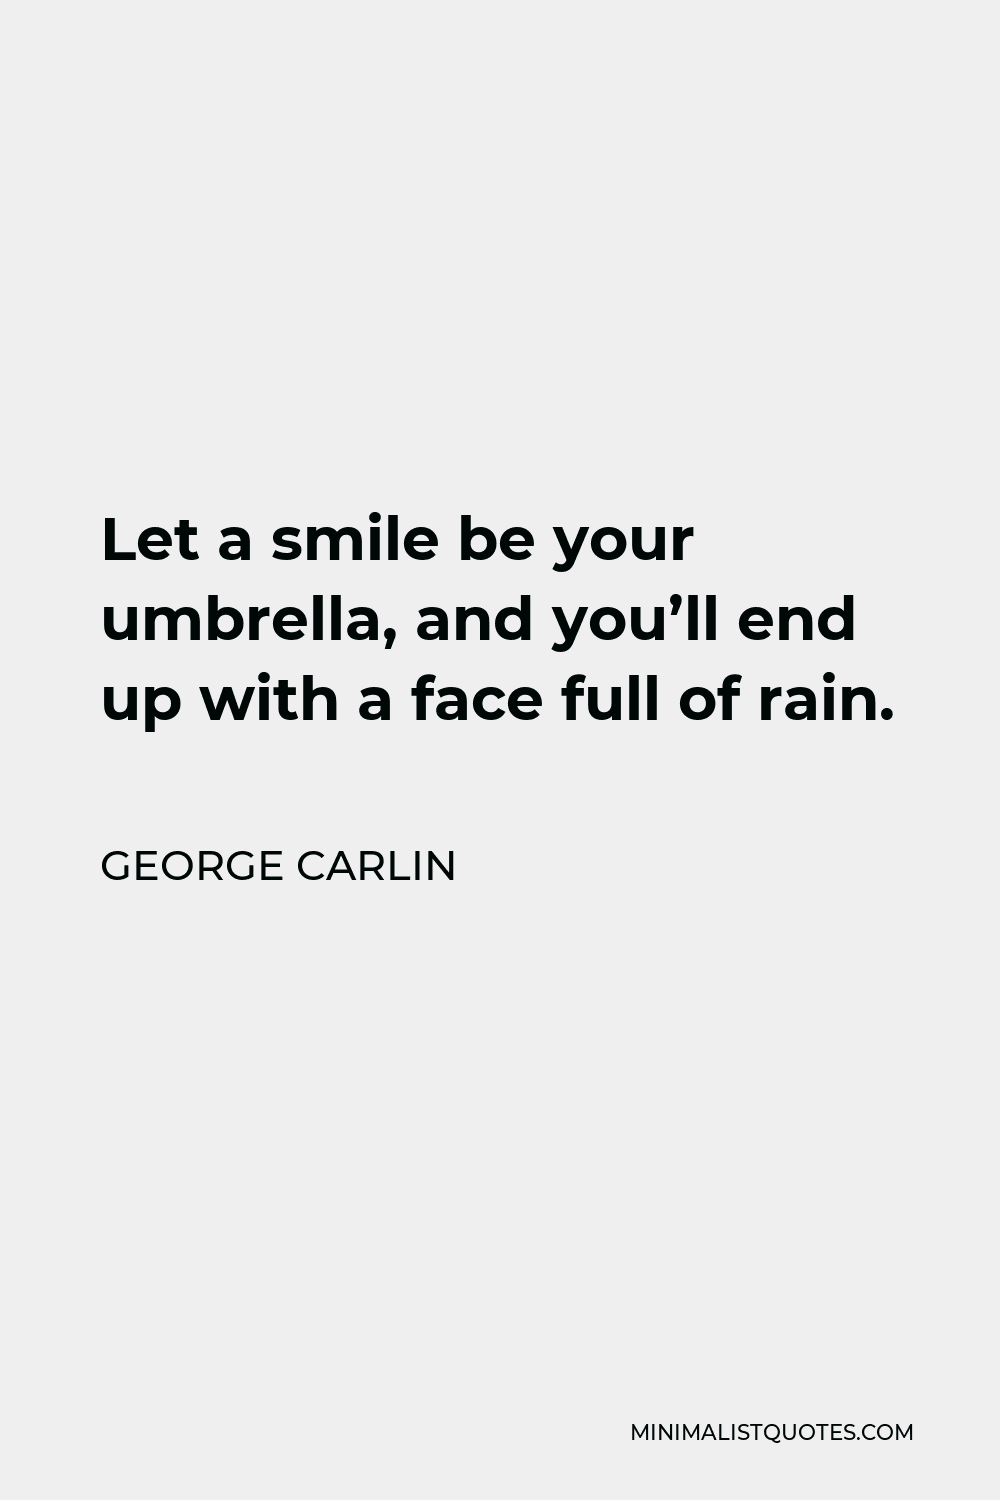 George Carlin Quote - Let a smile be your umbrella, and you’ll end up with a face full of rain.